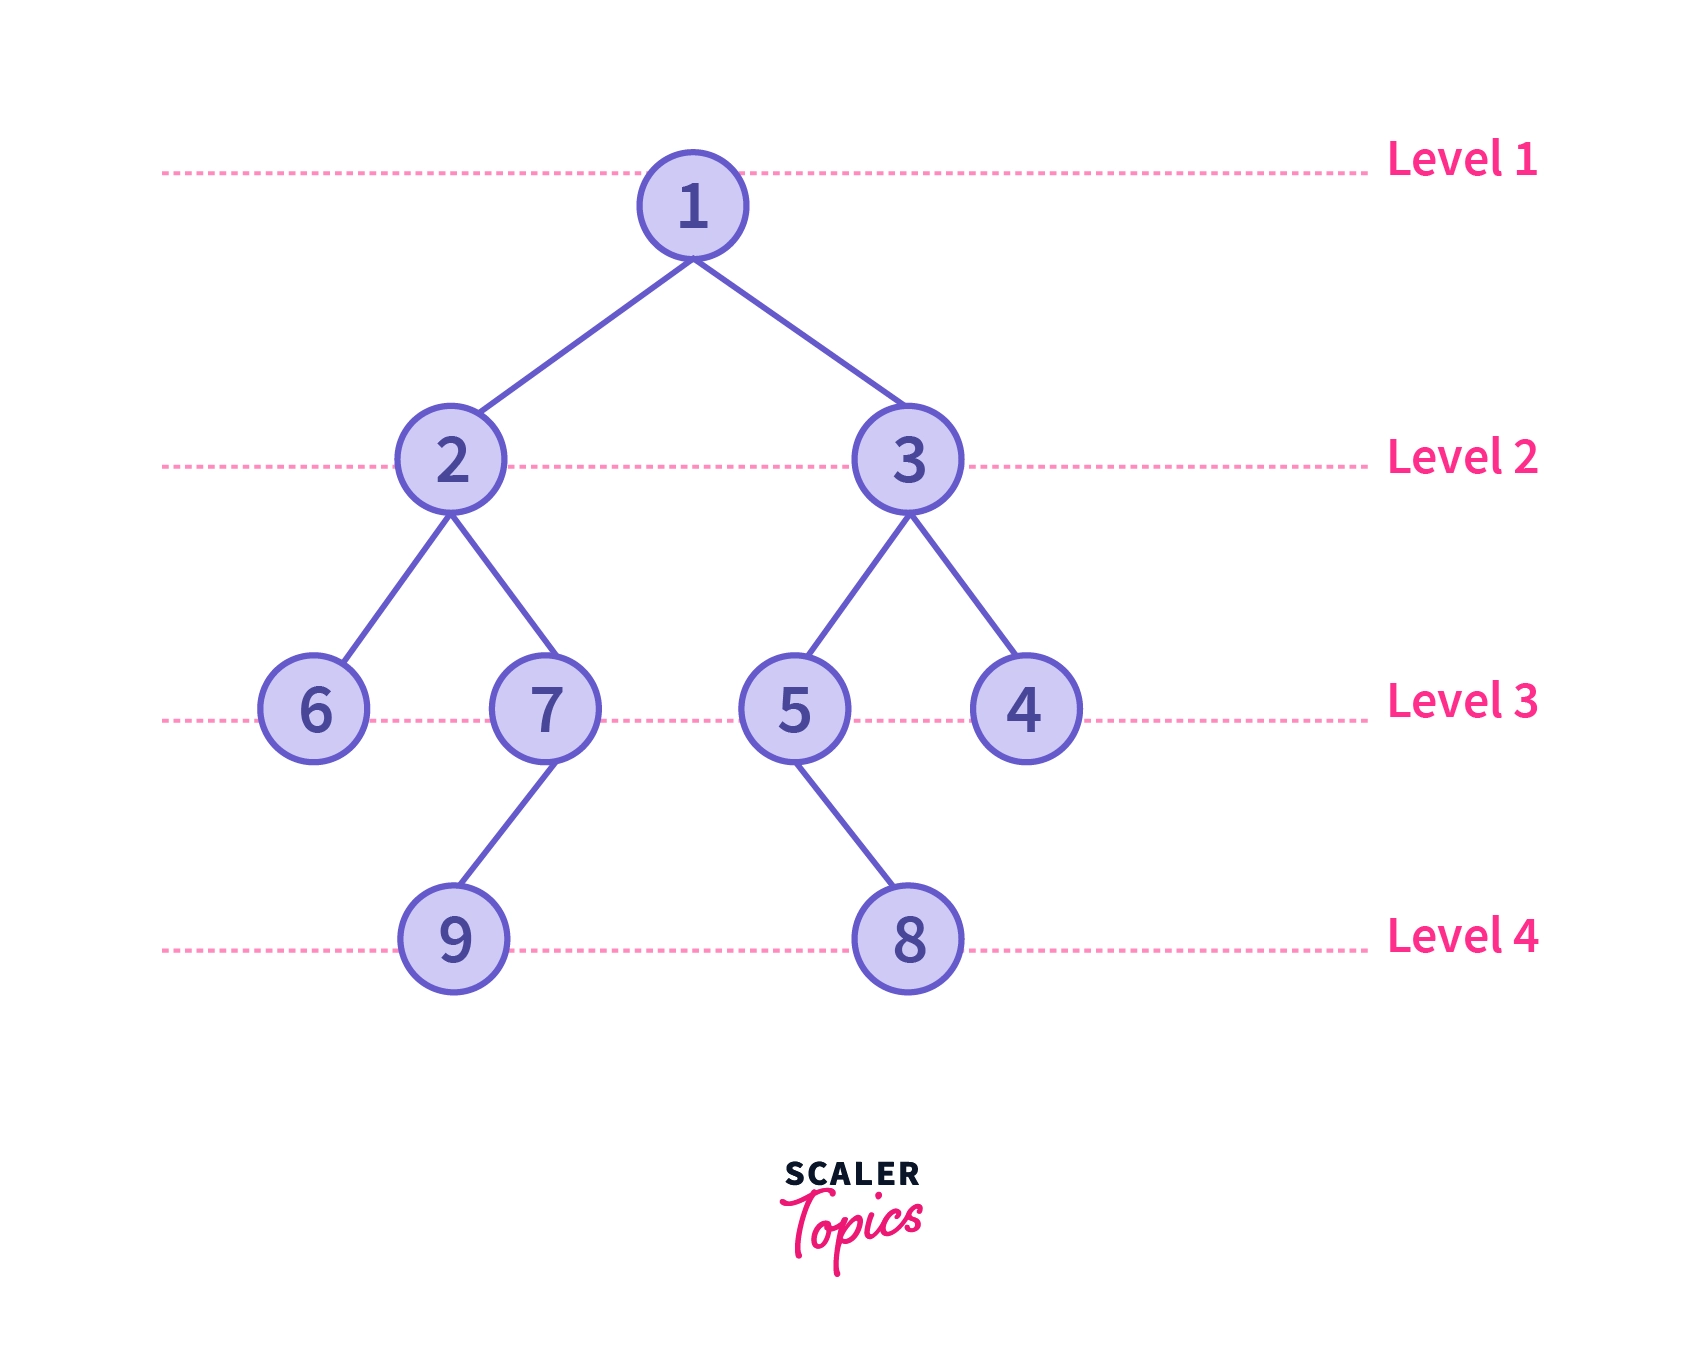 What is the Right View of Binary Tree